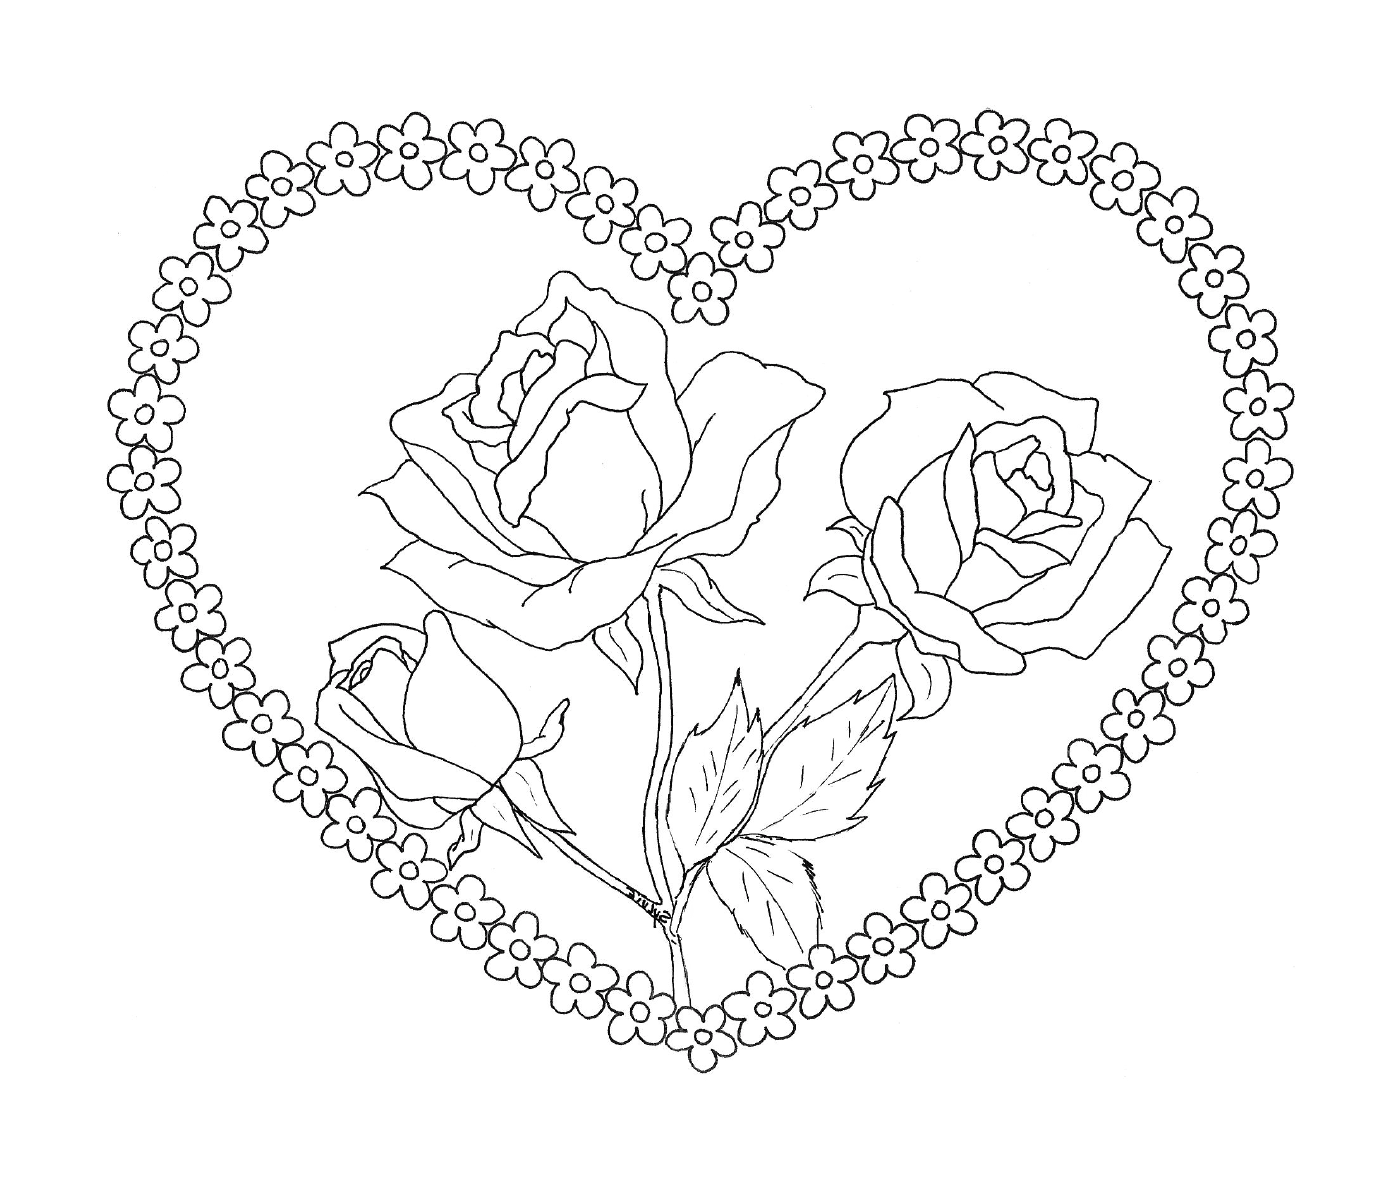  Heart with roses inside 